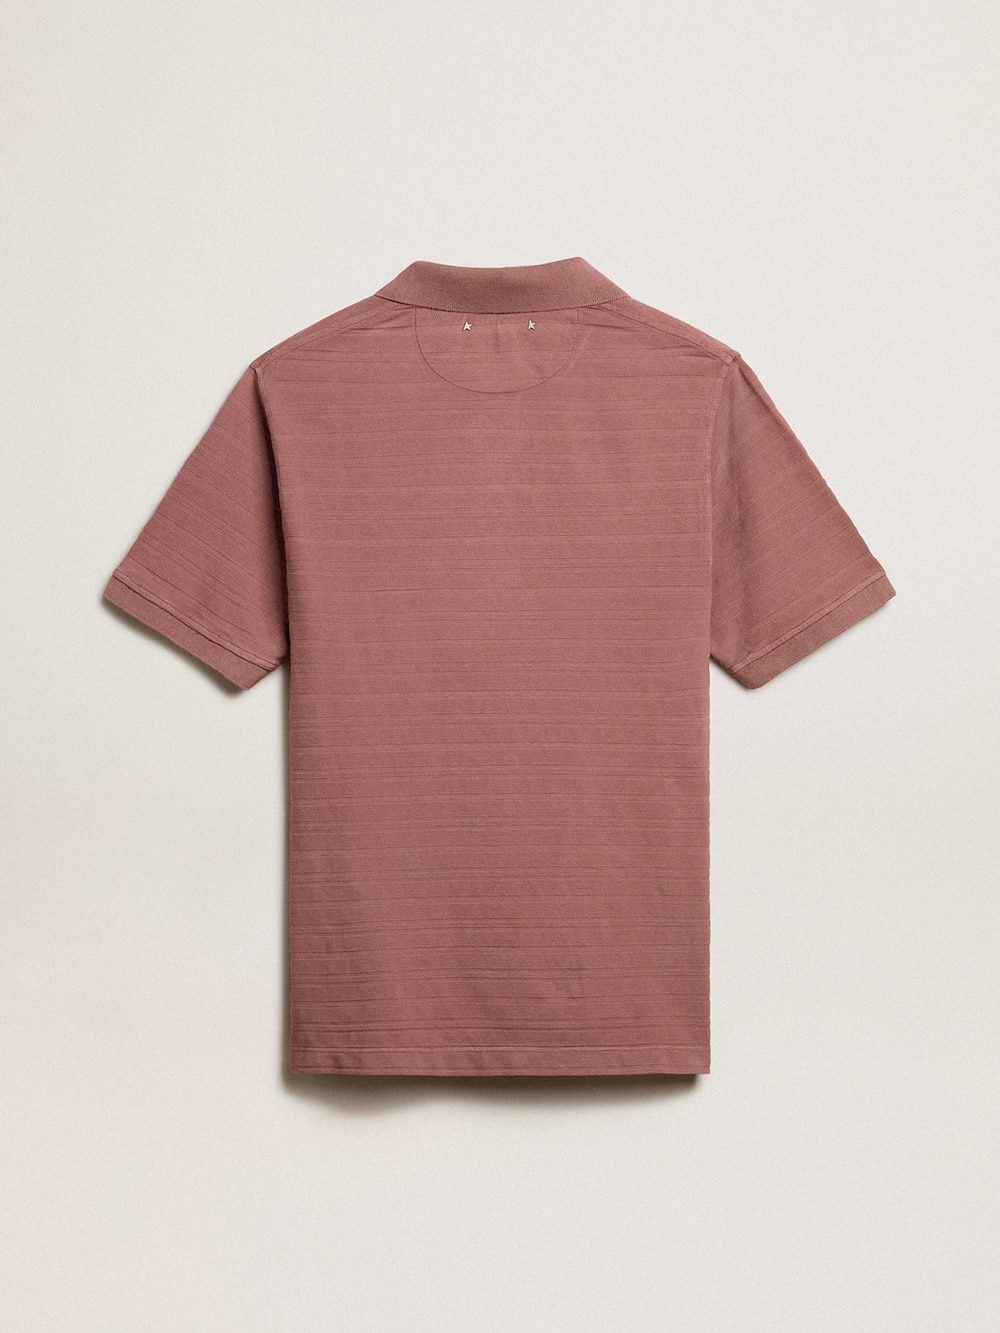 Golden Goose - Taupe pink-colored cotton piquet polo shirt in 